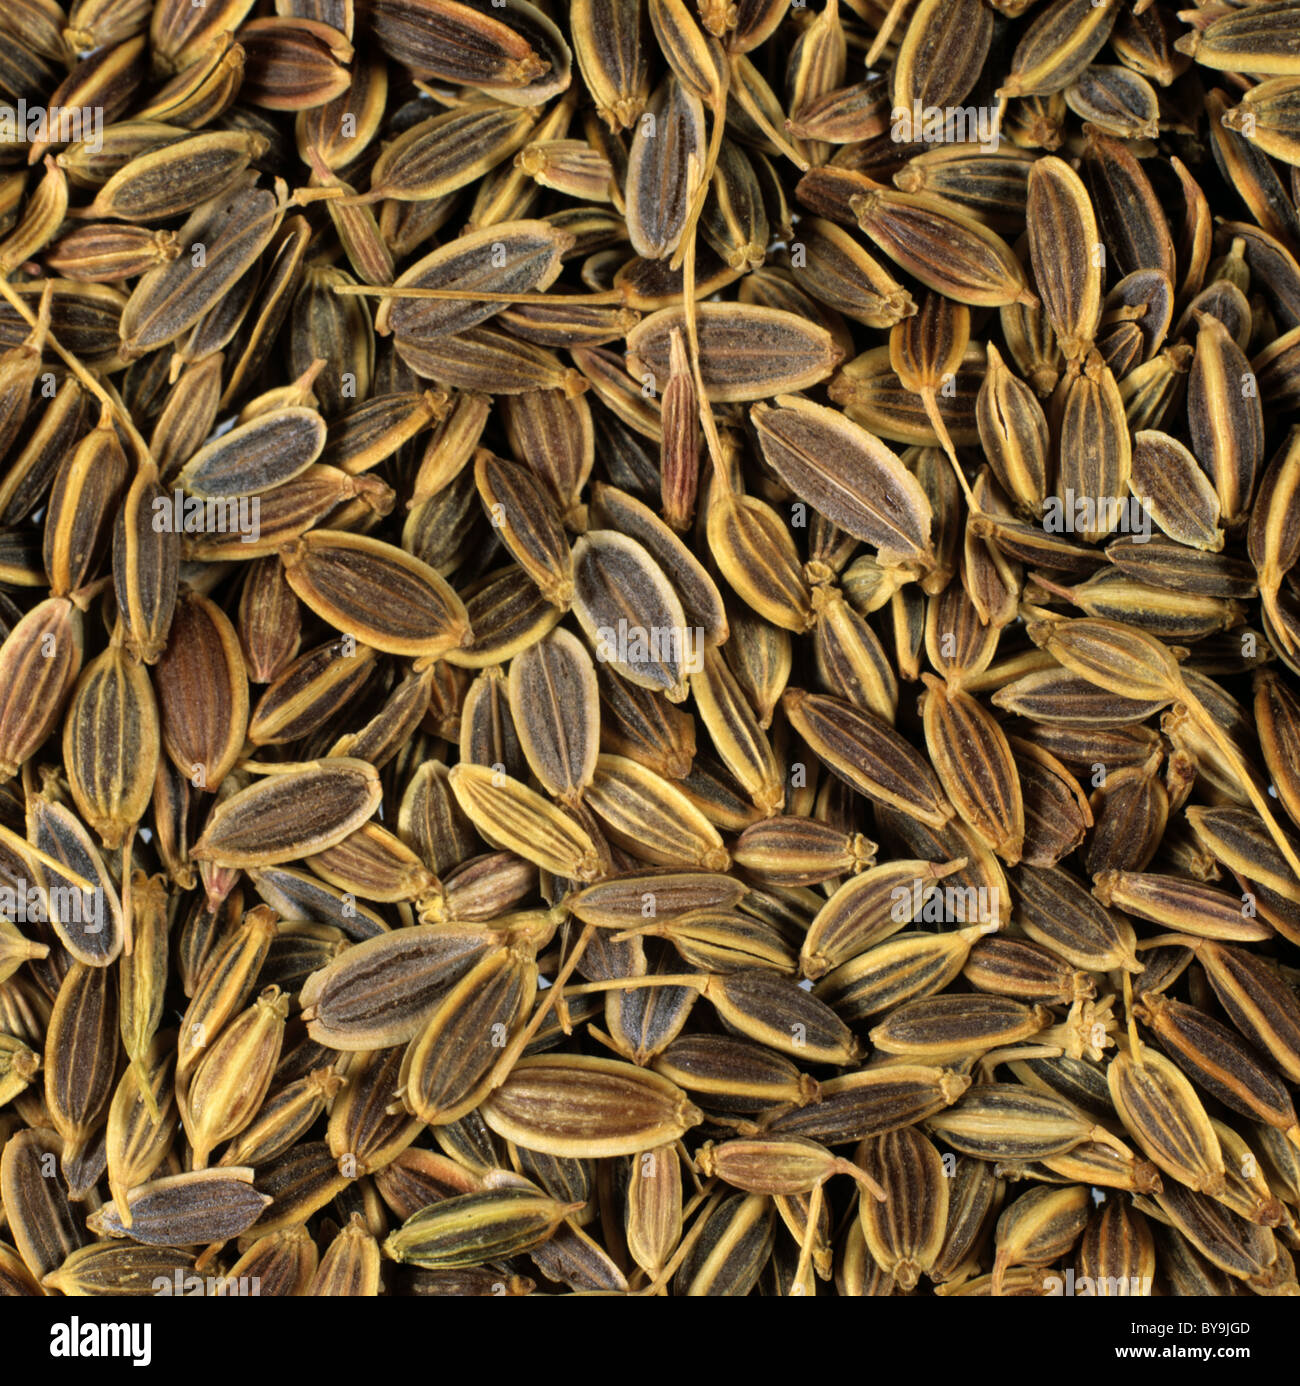 Dill seed as bought from a health food shop or for growing Stock Photo